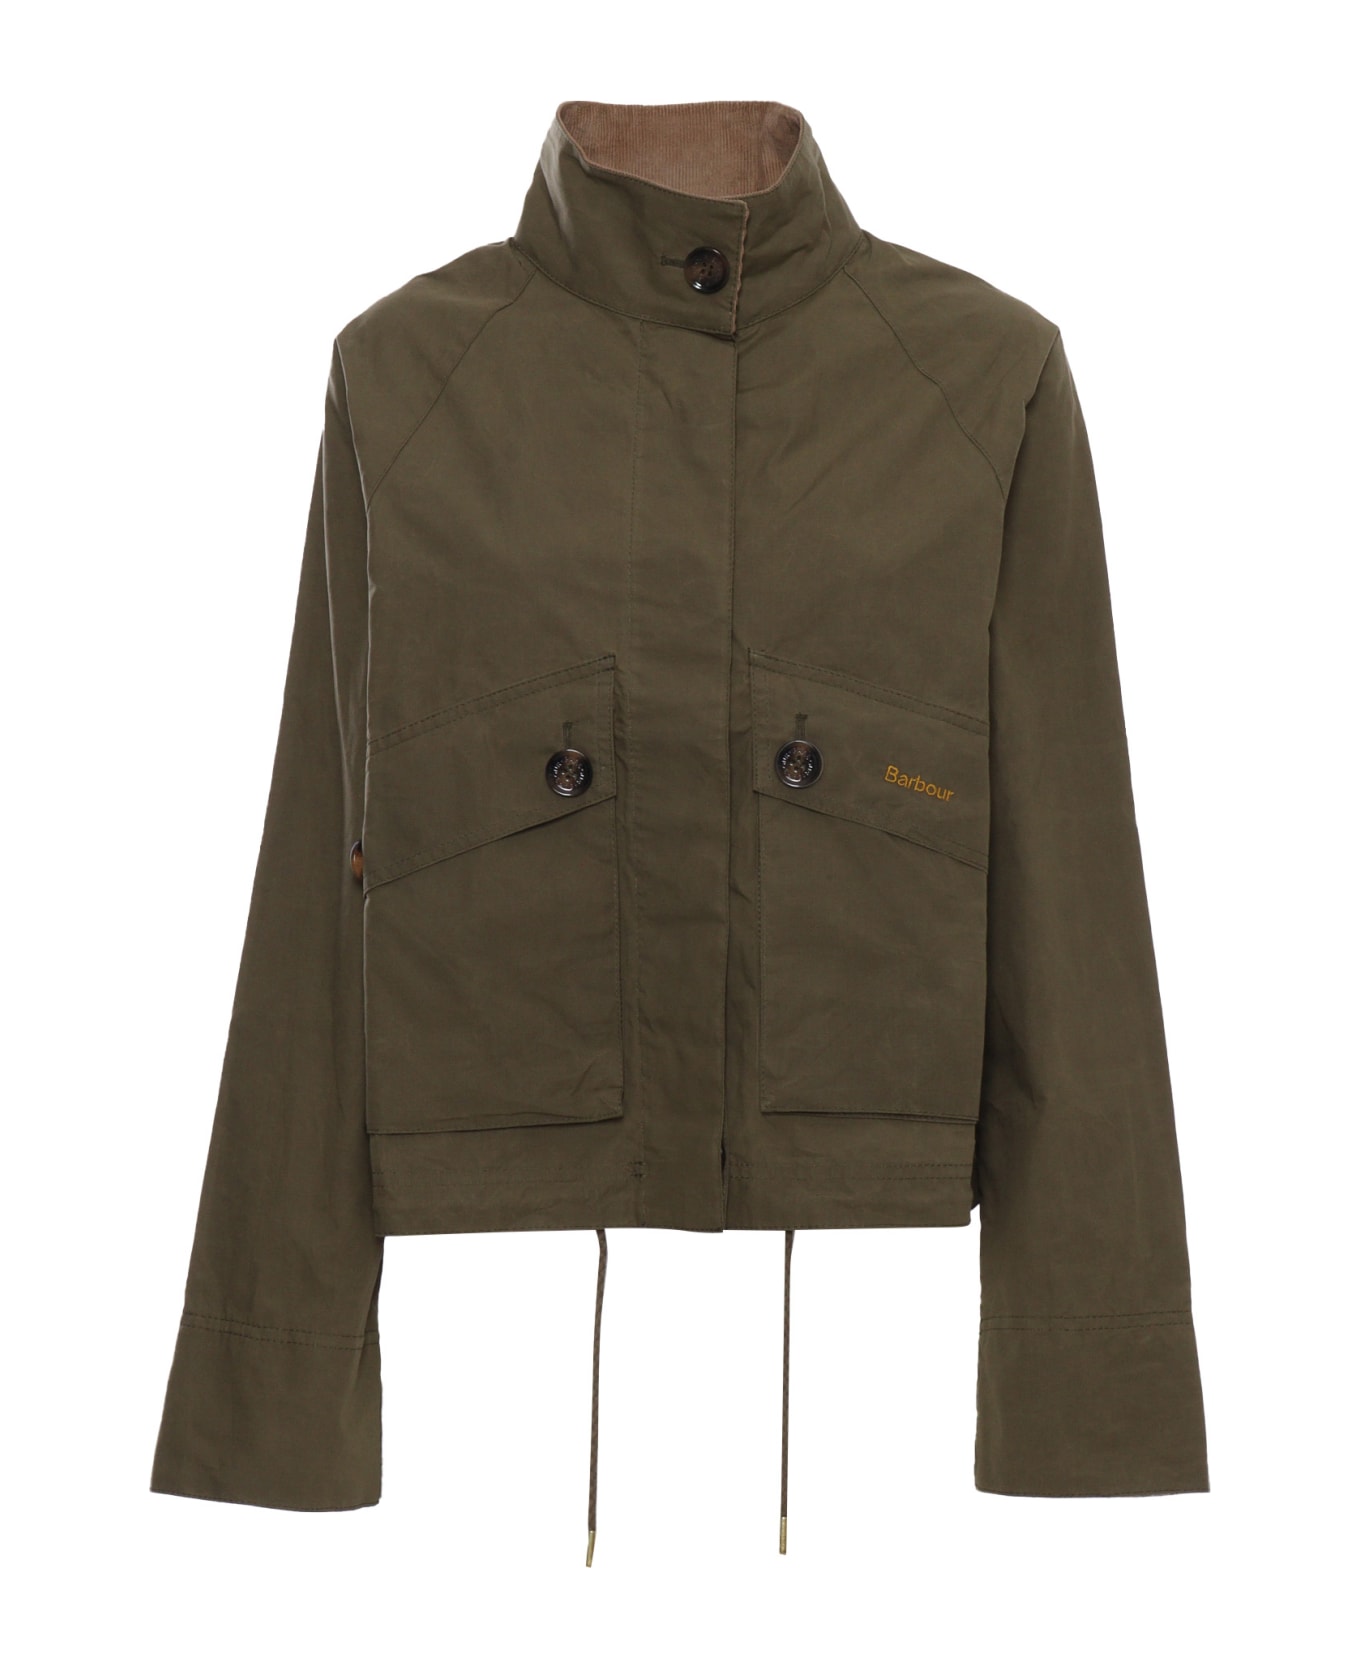 Barbour Military Green Jacket - GREEN